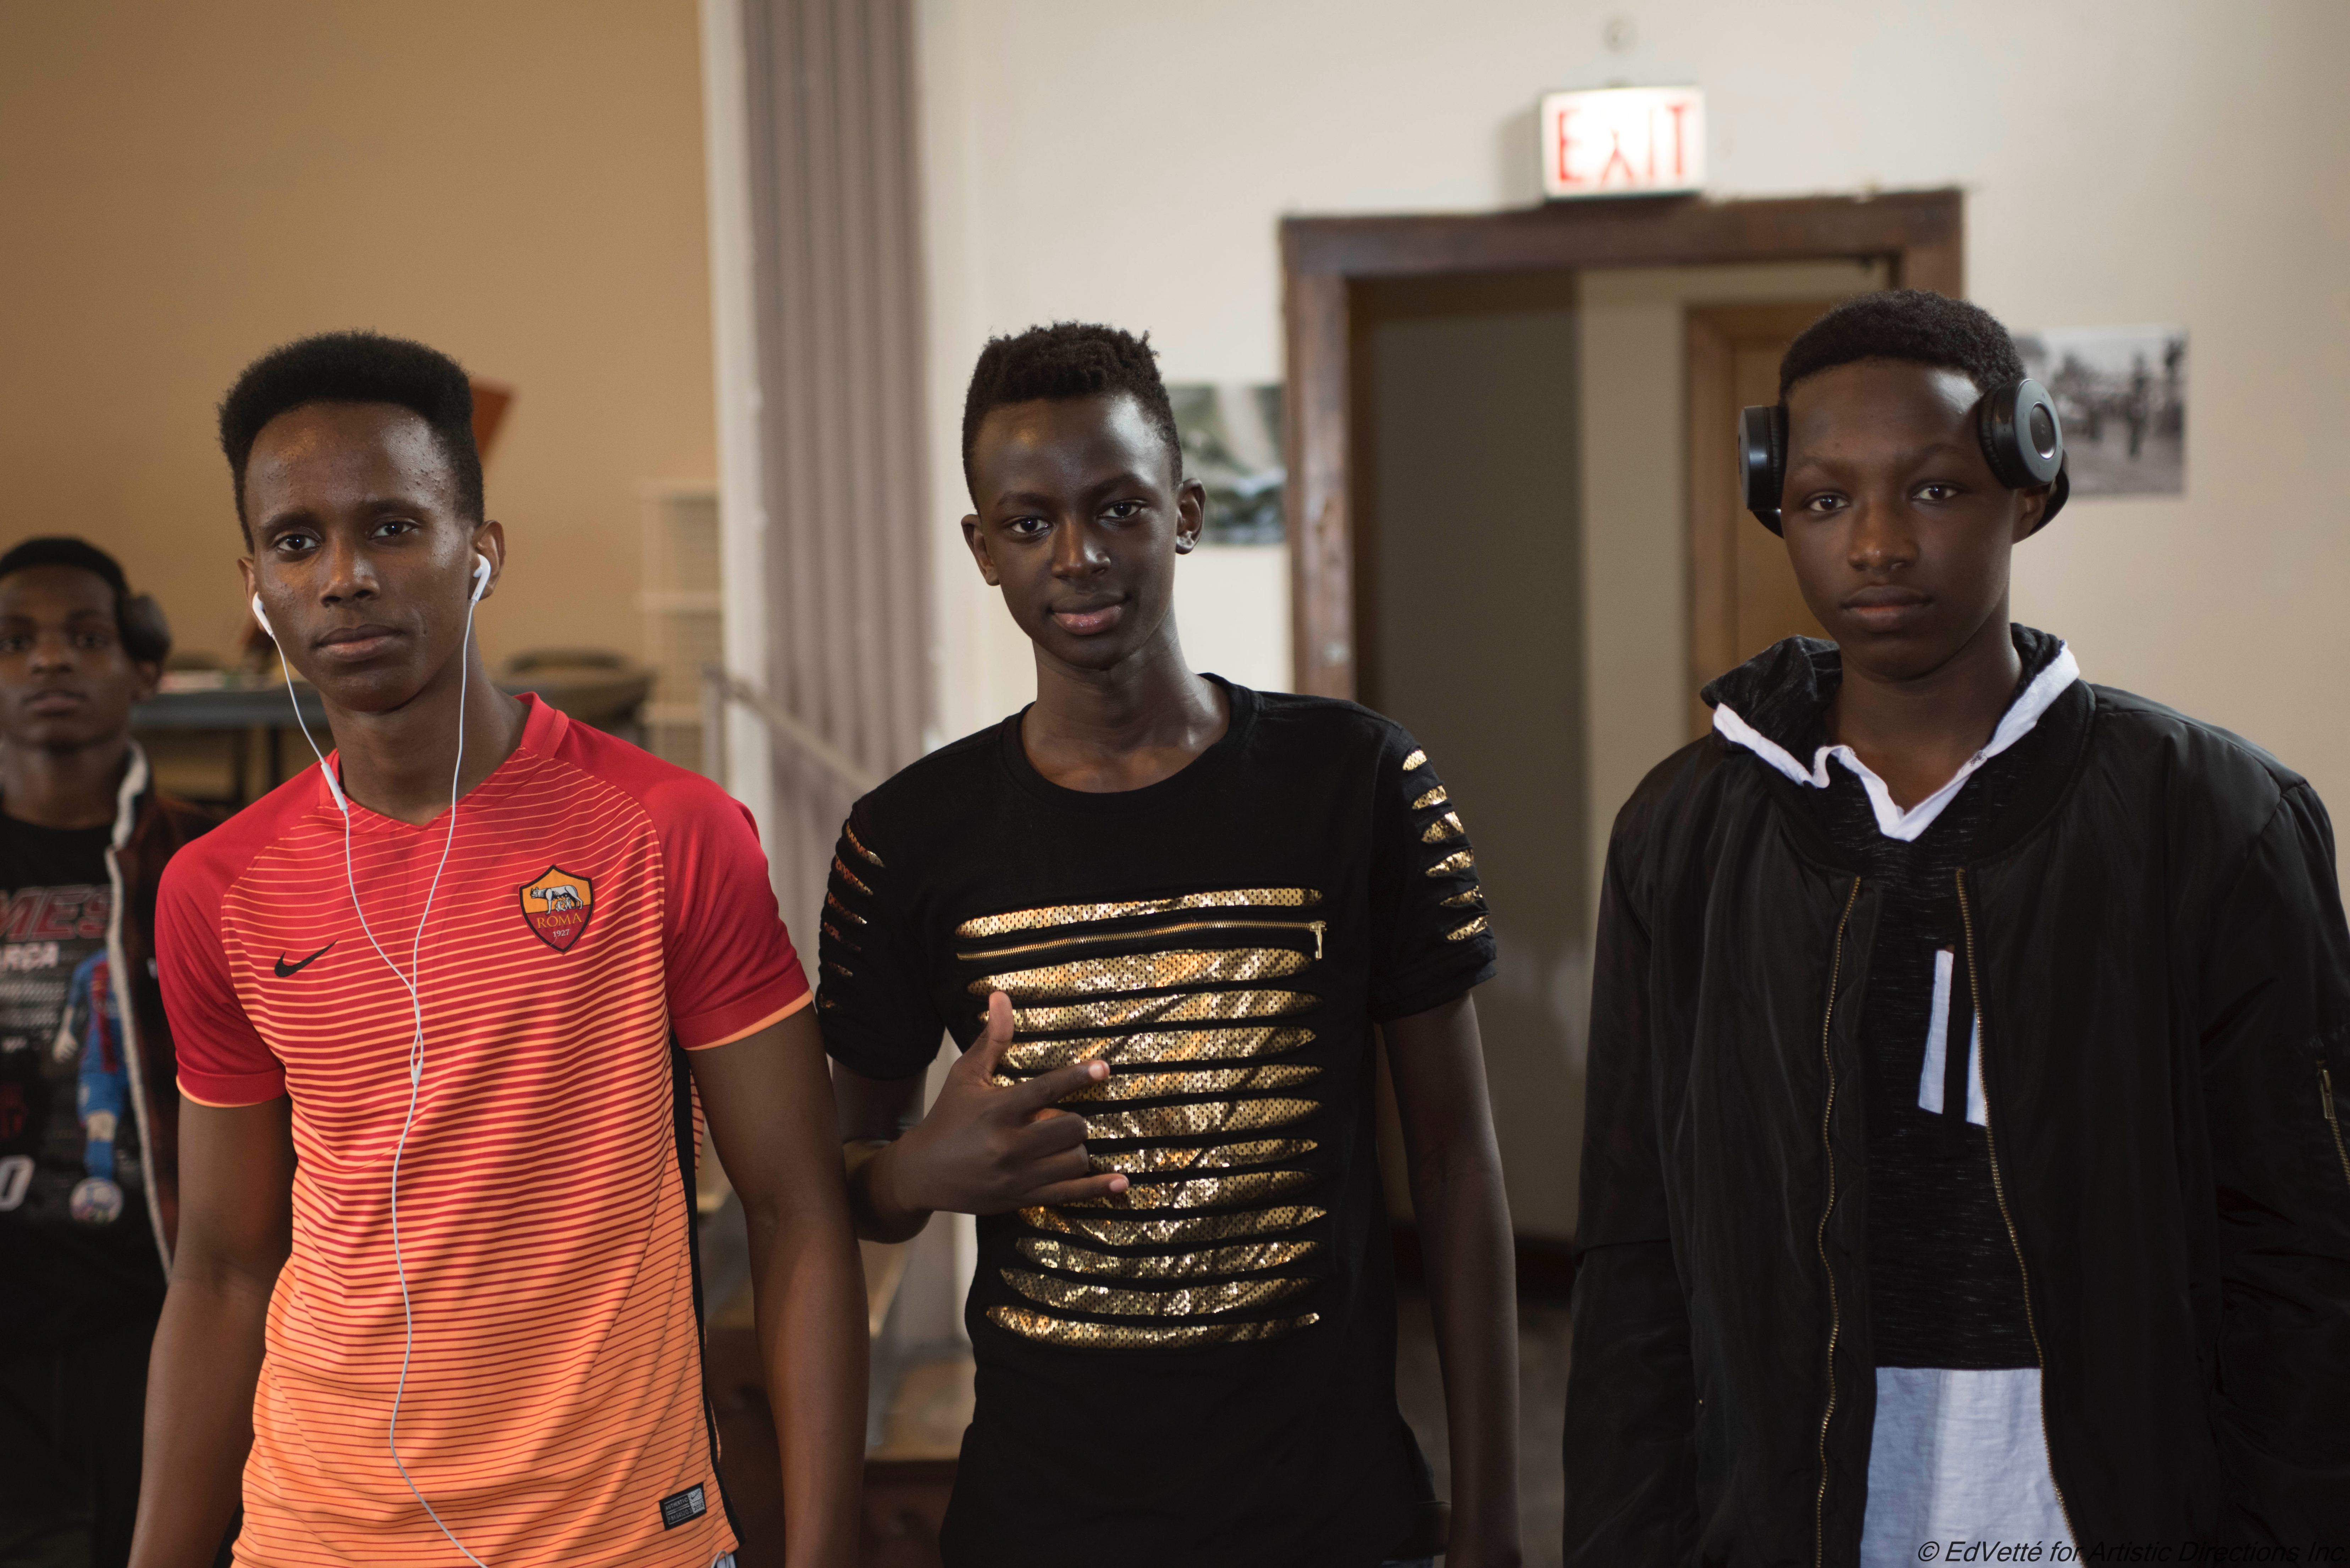 Three male students from Circles and Ciphers pose in observation of the camera: the left subject furthest to the left wears an orange and white soccer style jersey; the center subject wears a black and gold shirt while gesturing with his hand; the right subject wears a jacket and has on a large set of headphones.